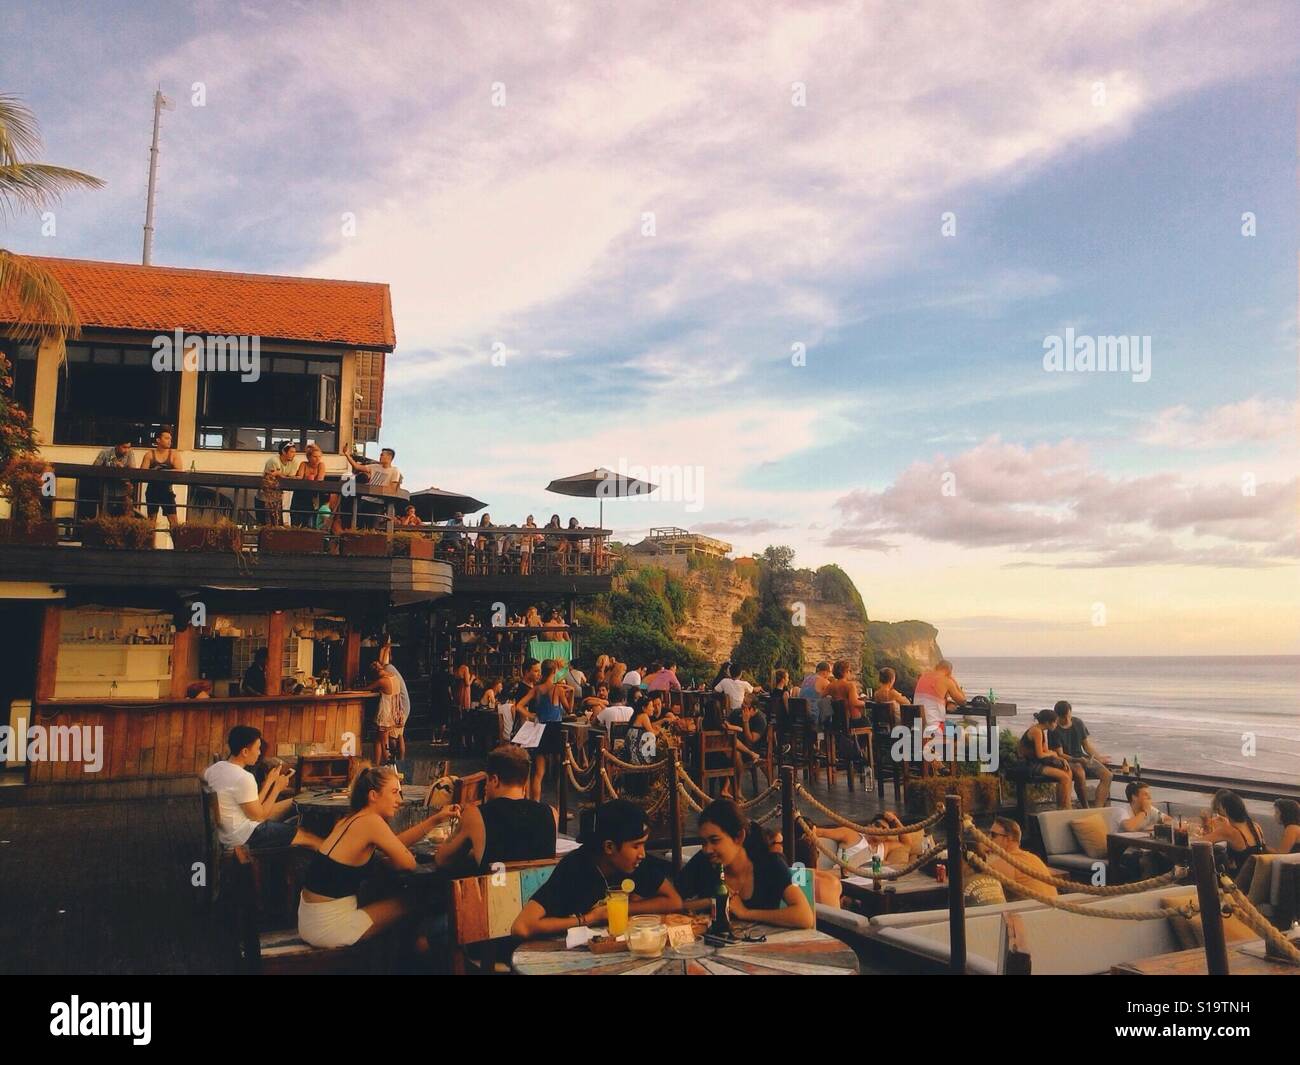 Chill, Relax, and See Sunset at Single Fin Bali Stock Photo - Alamy